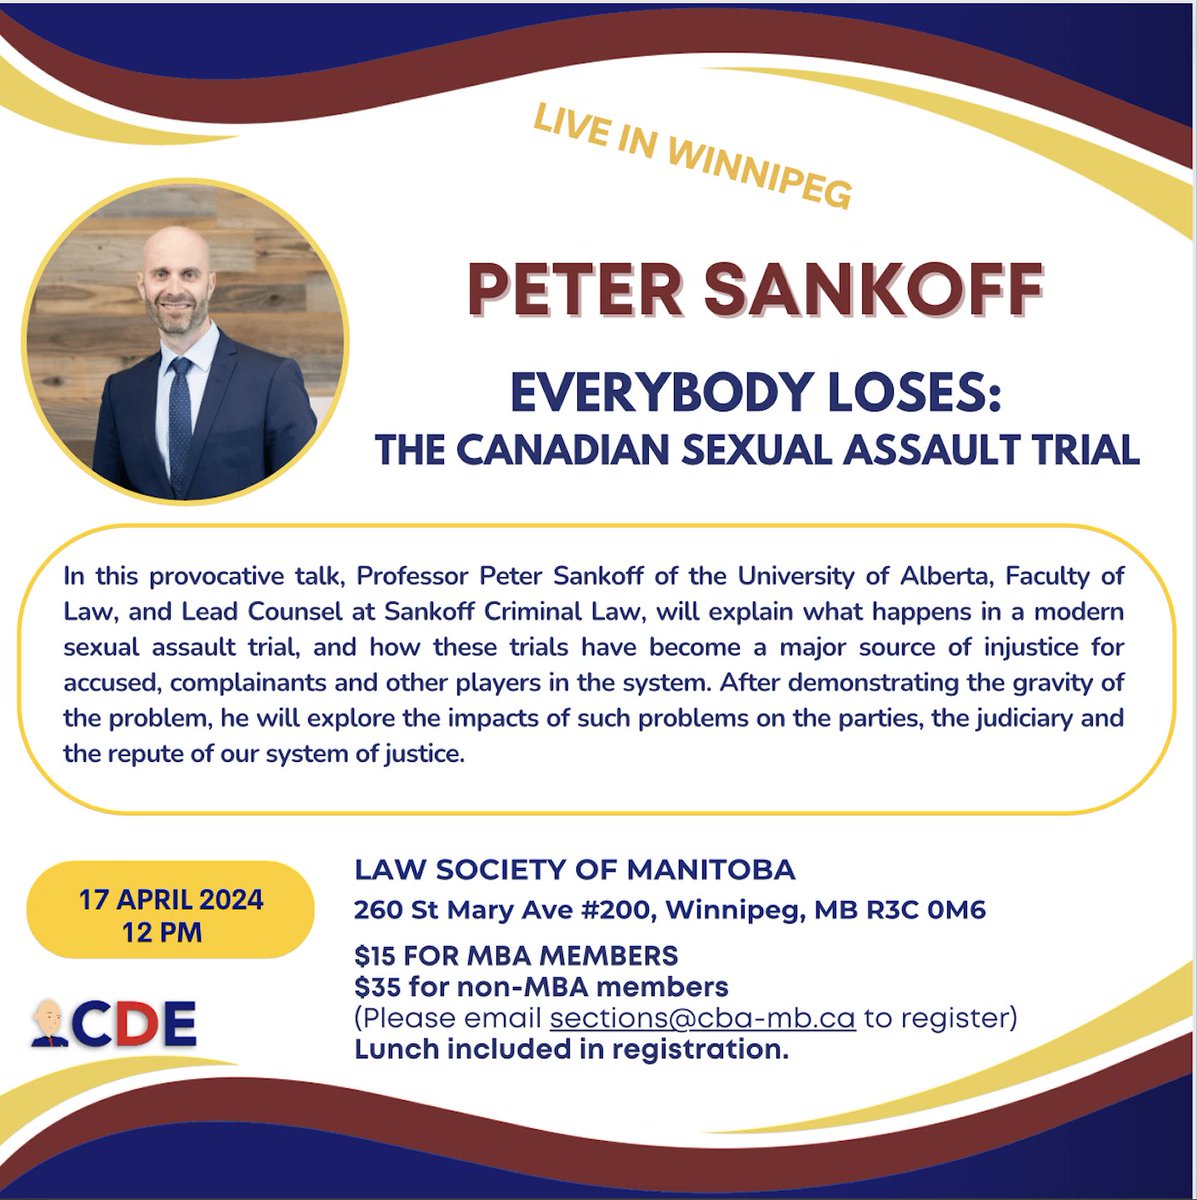 Mark your calendar! Join @petersankoff in an enlightening discussion on where we are in the criminal justice system, and what needs to change. Live in Winnipeg on April 17th!